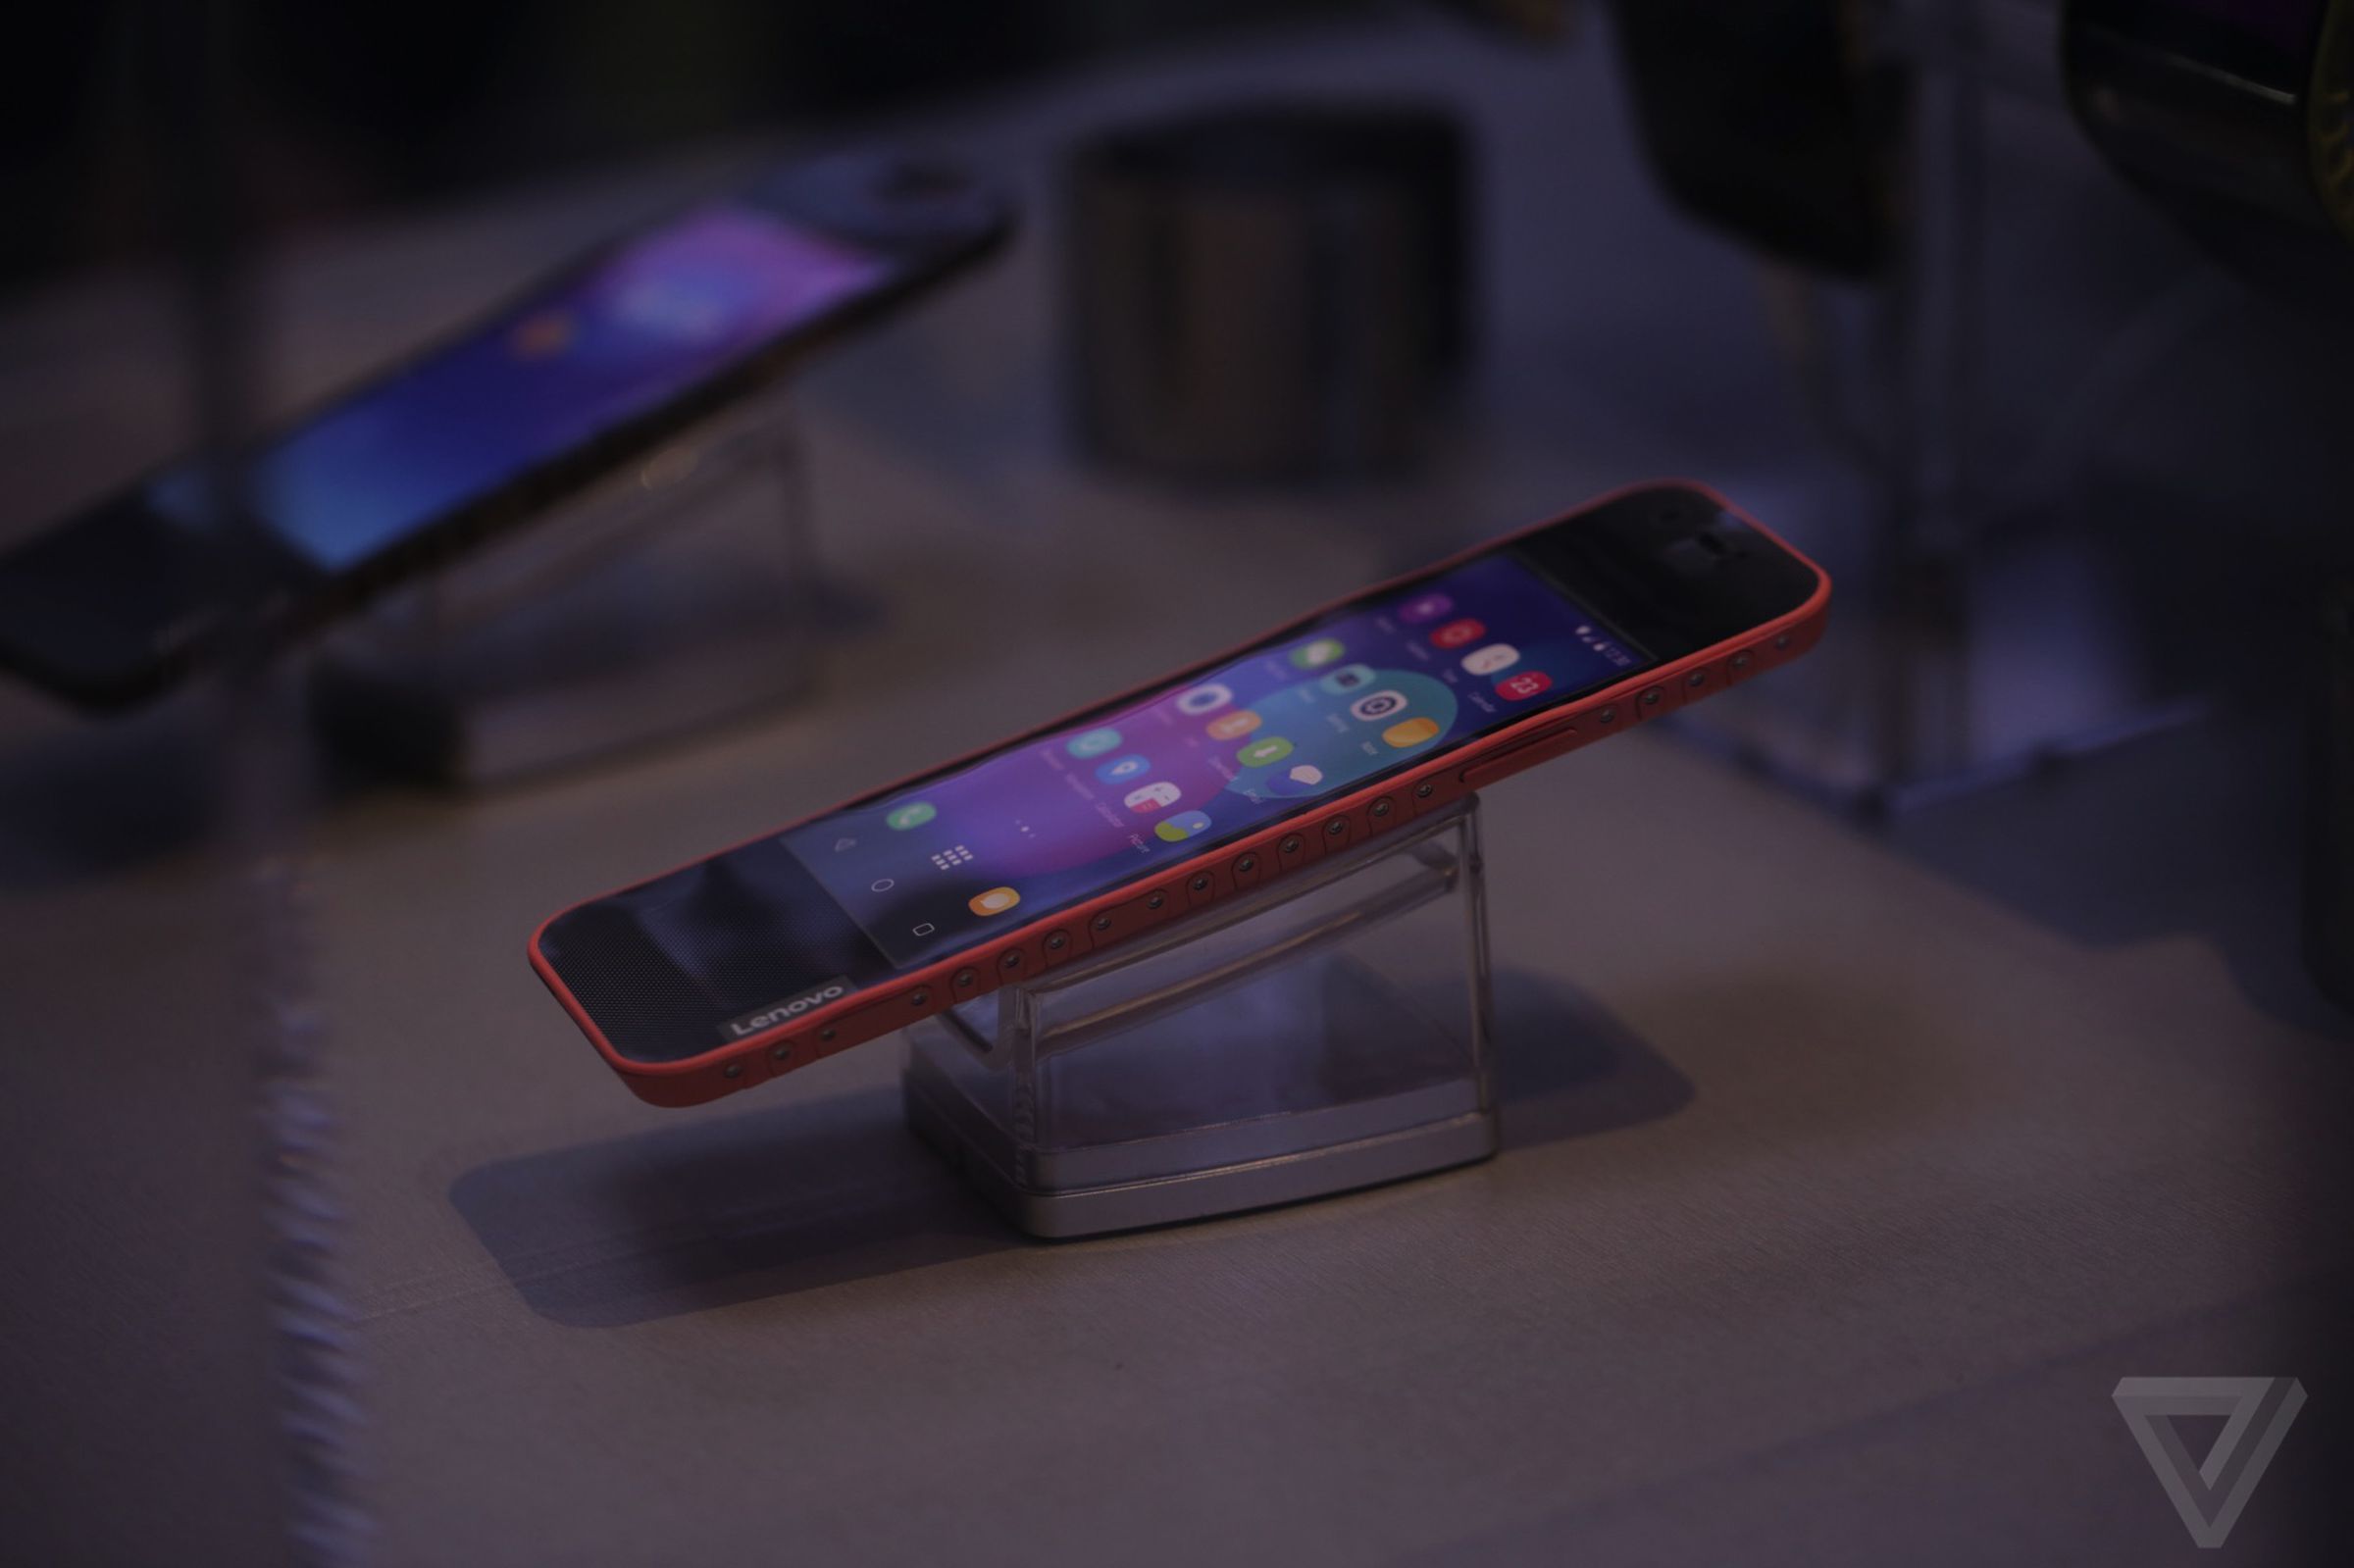 Lenovo's flexible phones and bendable tablets